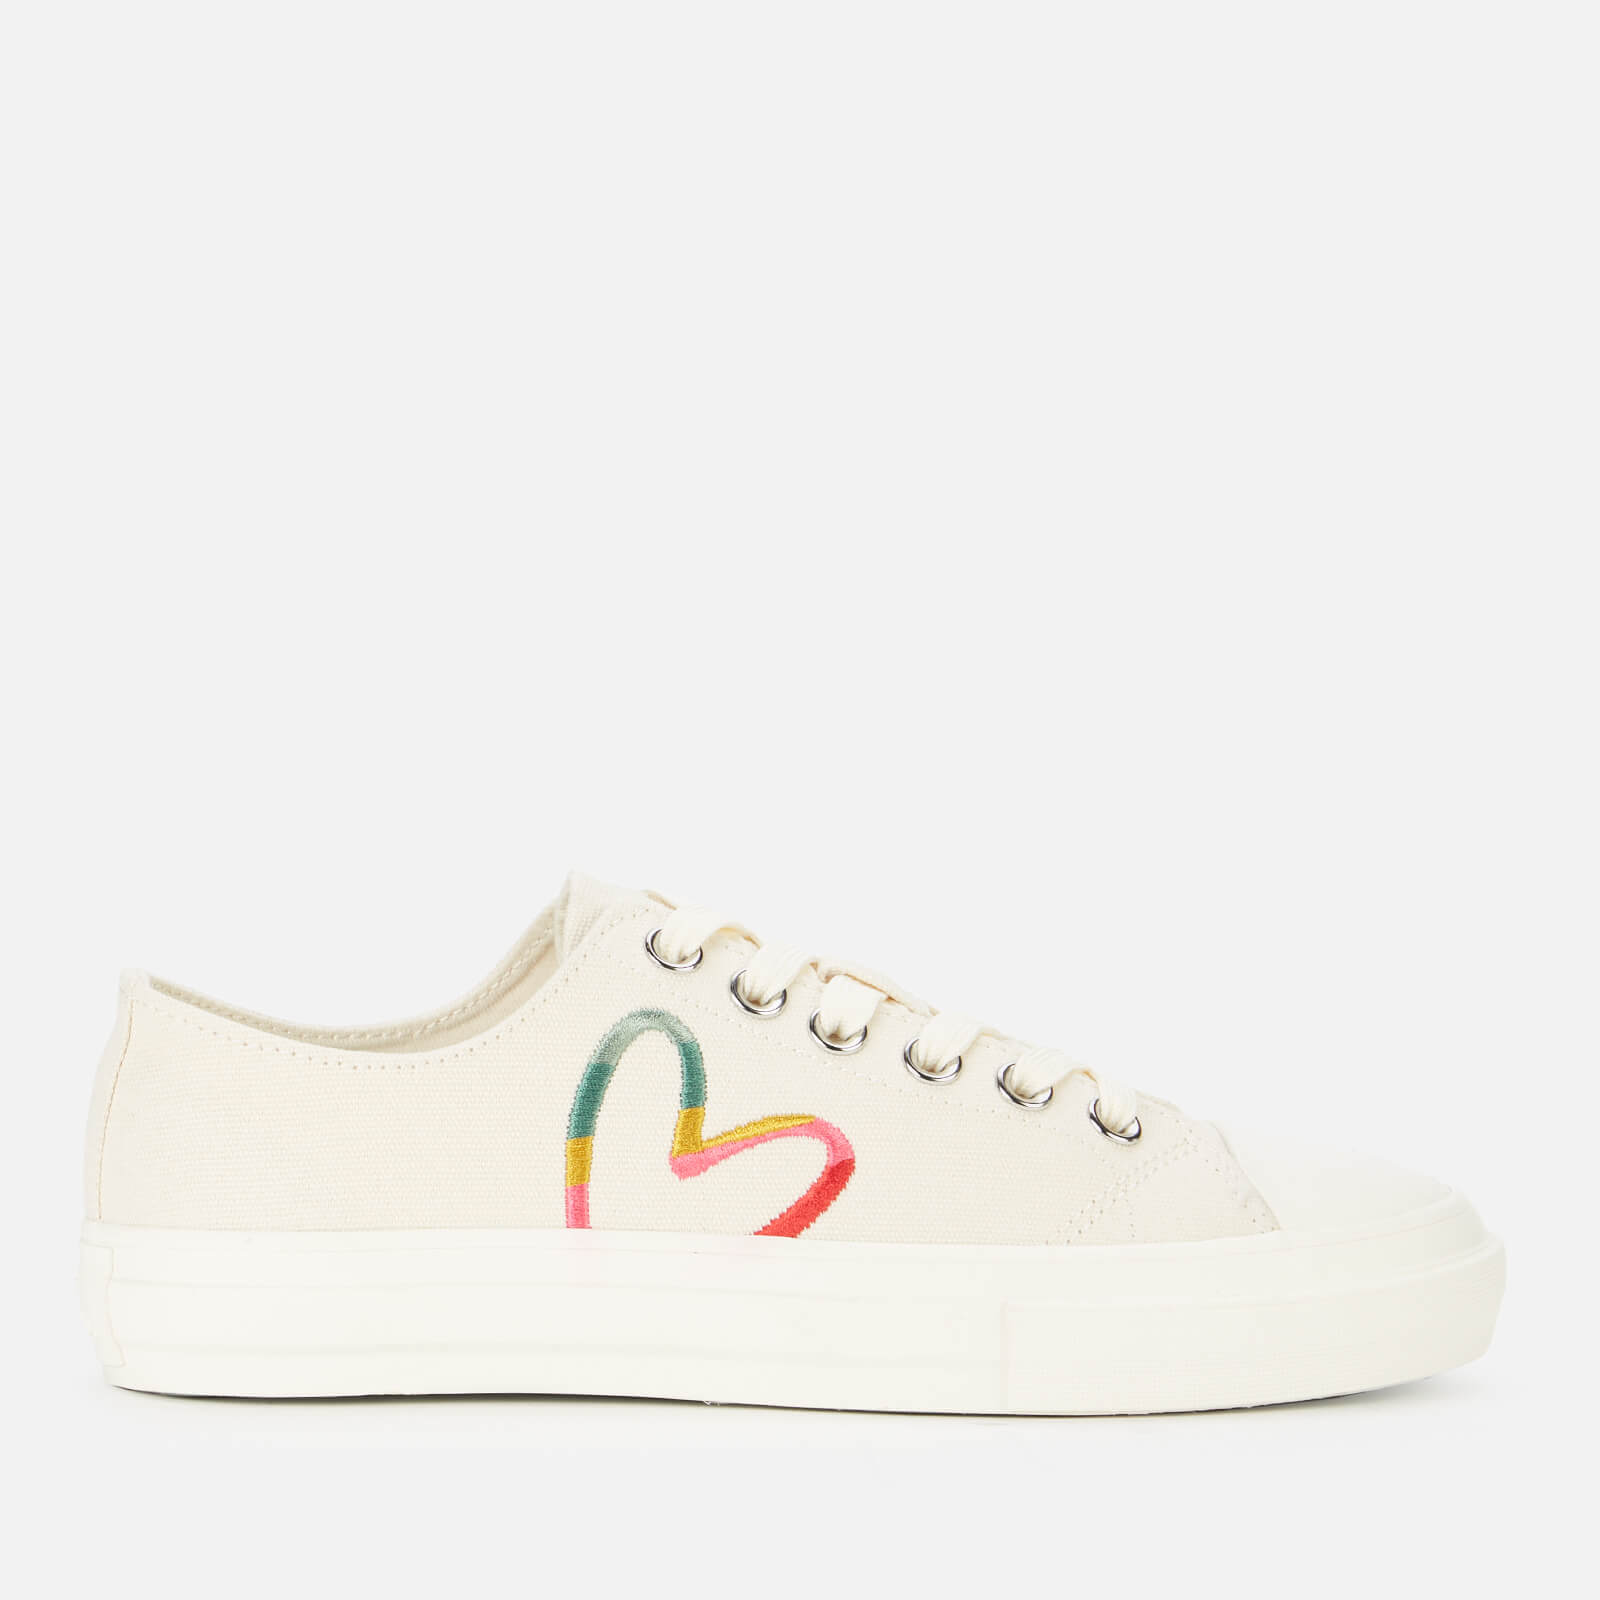 Paul Smith Women's Kinsey Canvas Trainers - White Heart - UK 3